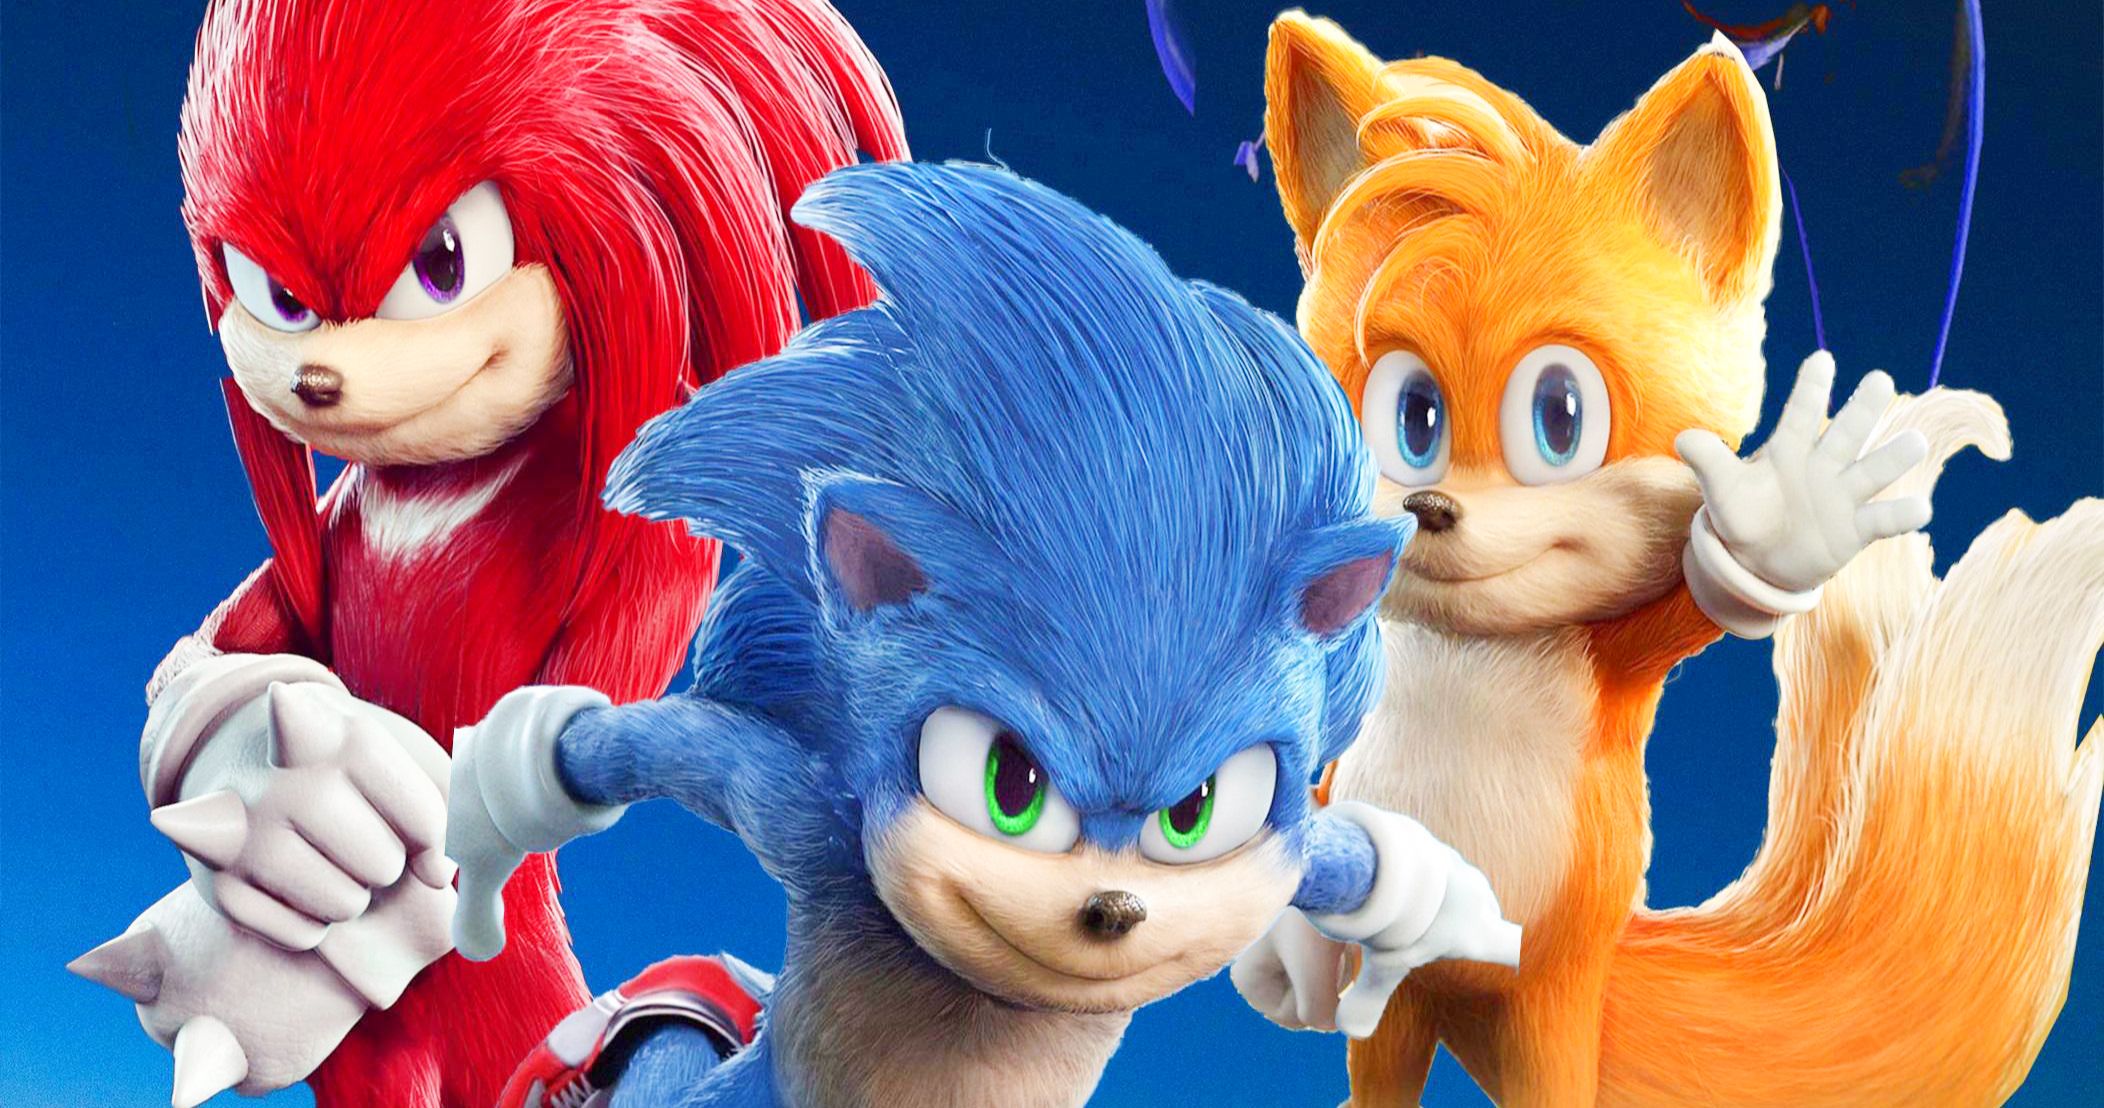 Sonic the Hedgehog 3 movie announced, live action series also